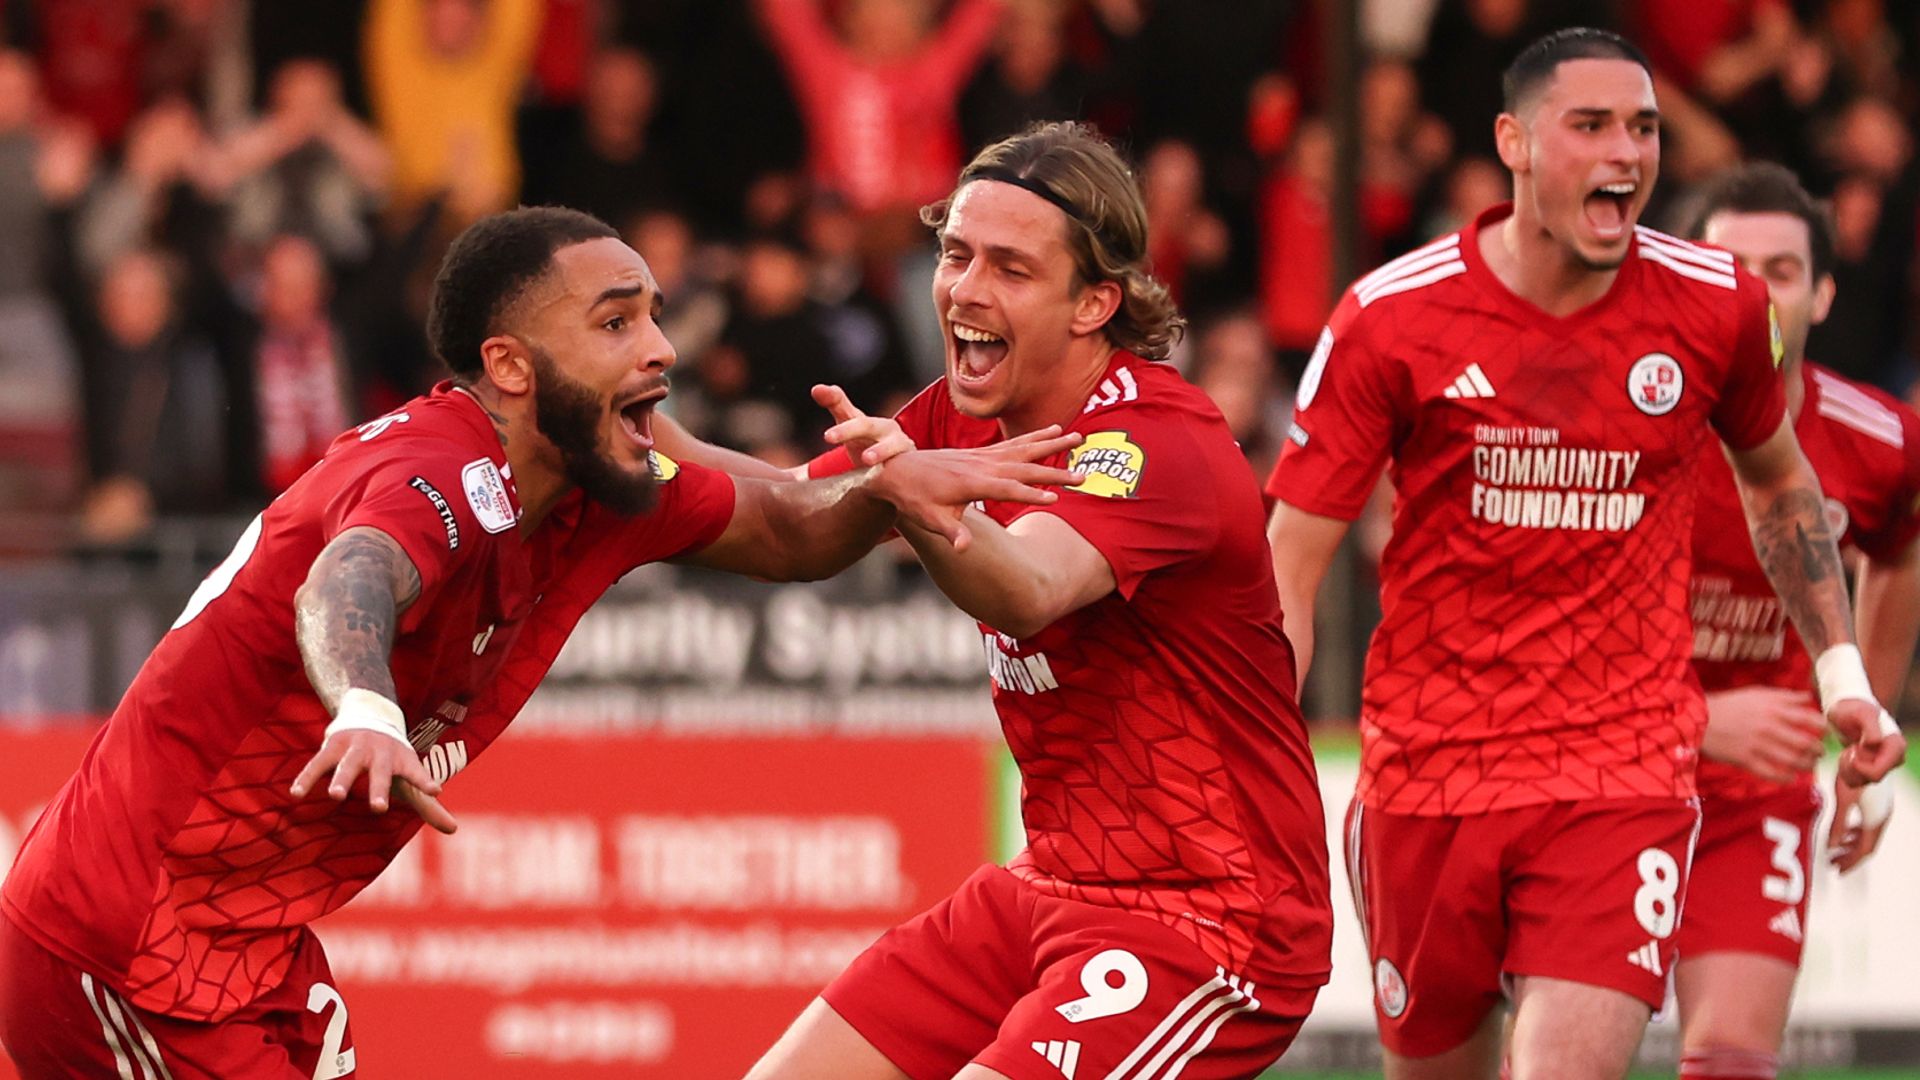 Play-off debutants Crawley storm to first-leg win over MK Dons